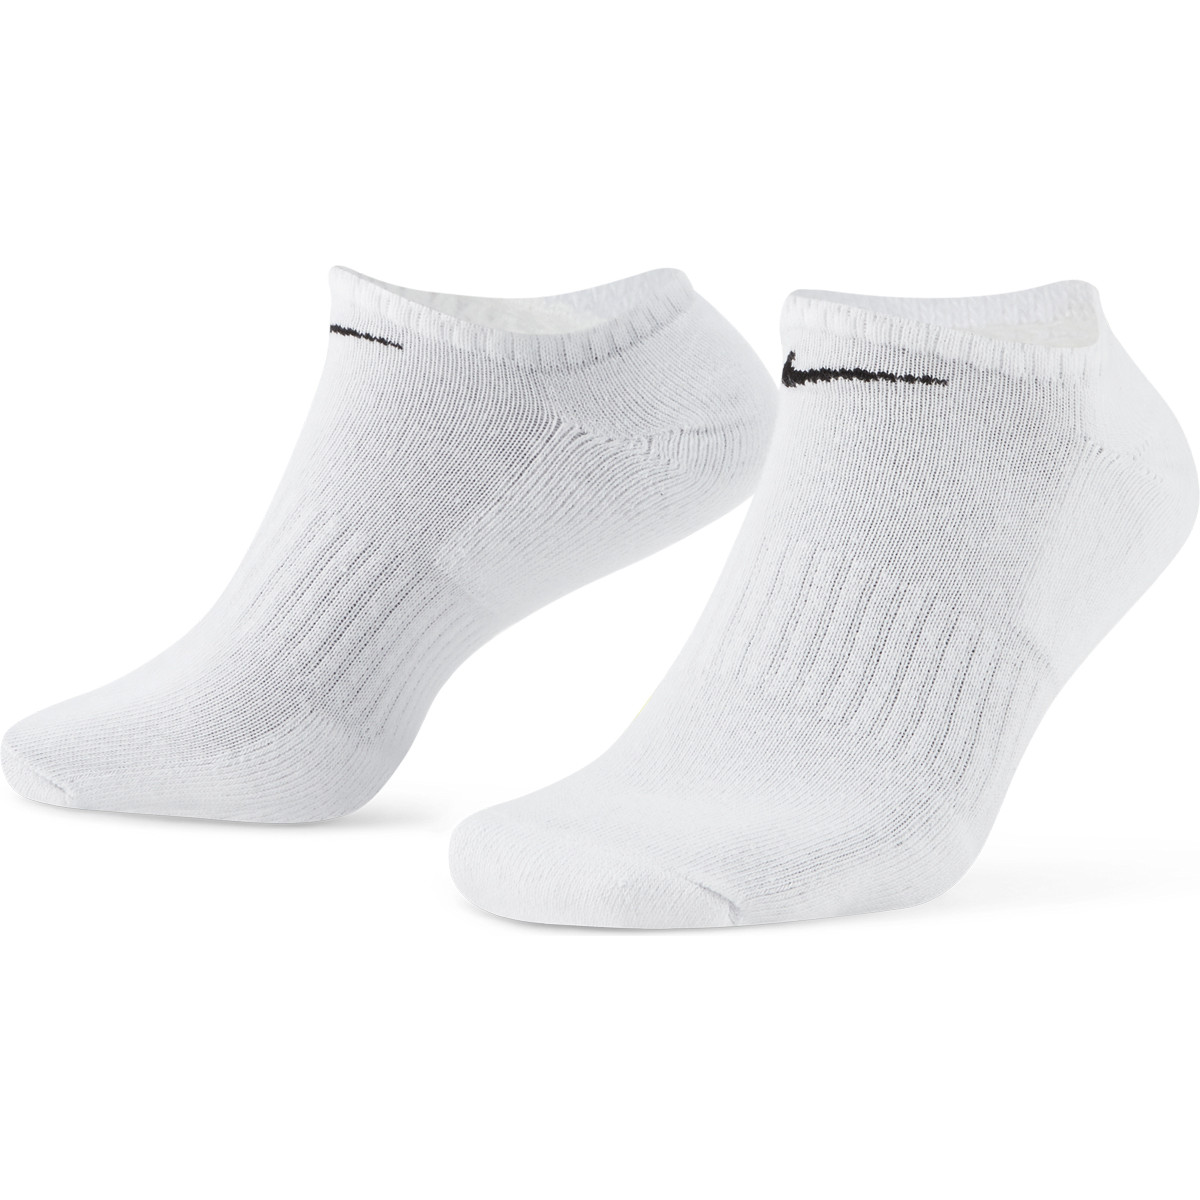 3 PARES DE CALCETINES NIKE CUSHION EVERYDAY EXTRA-BAJOS - NIKE - Mujer -  Ropa